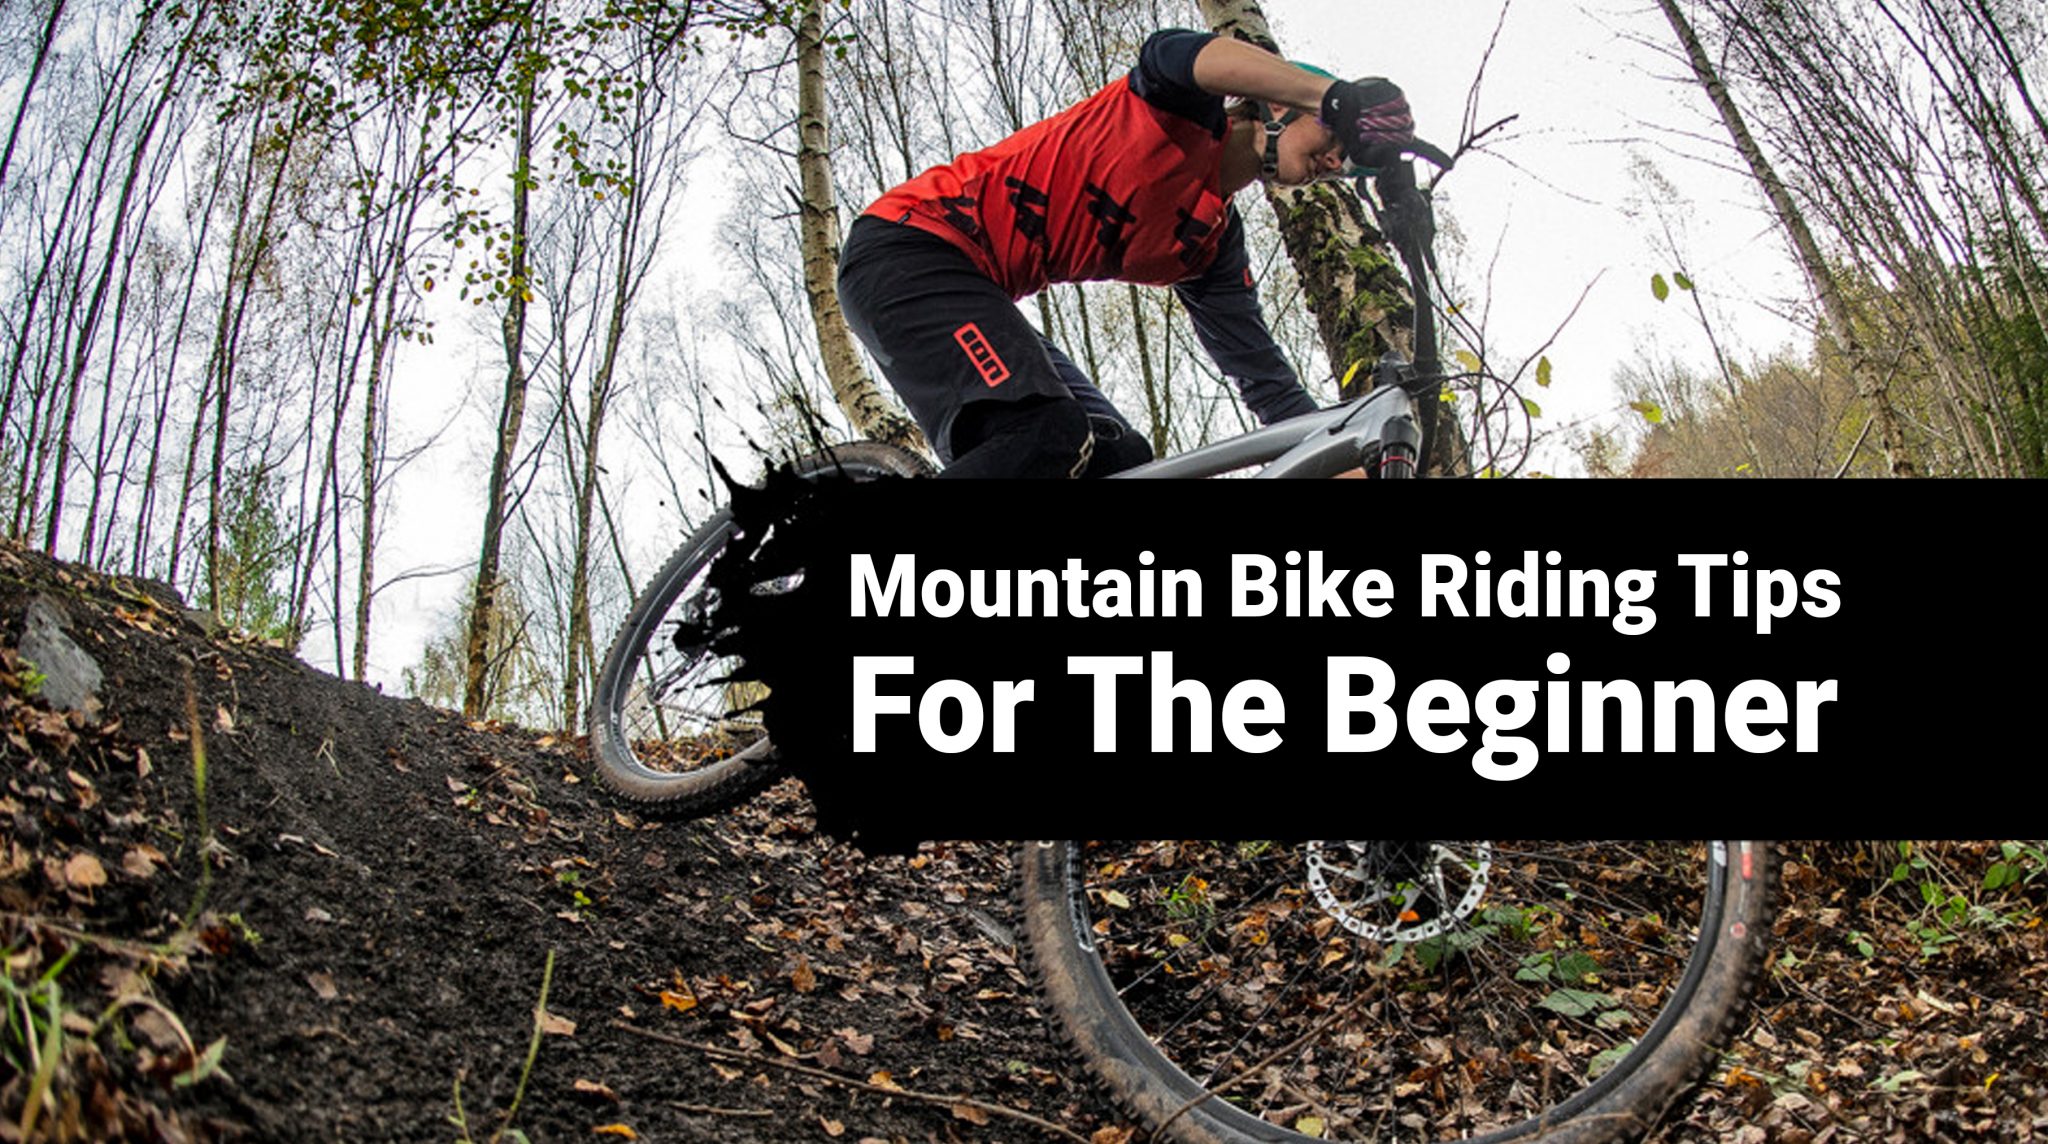 Mountain Bike Riding Tips For The Beginner - amarcycle.com